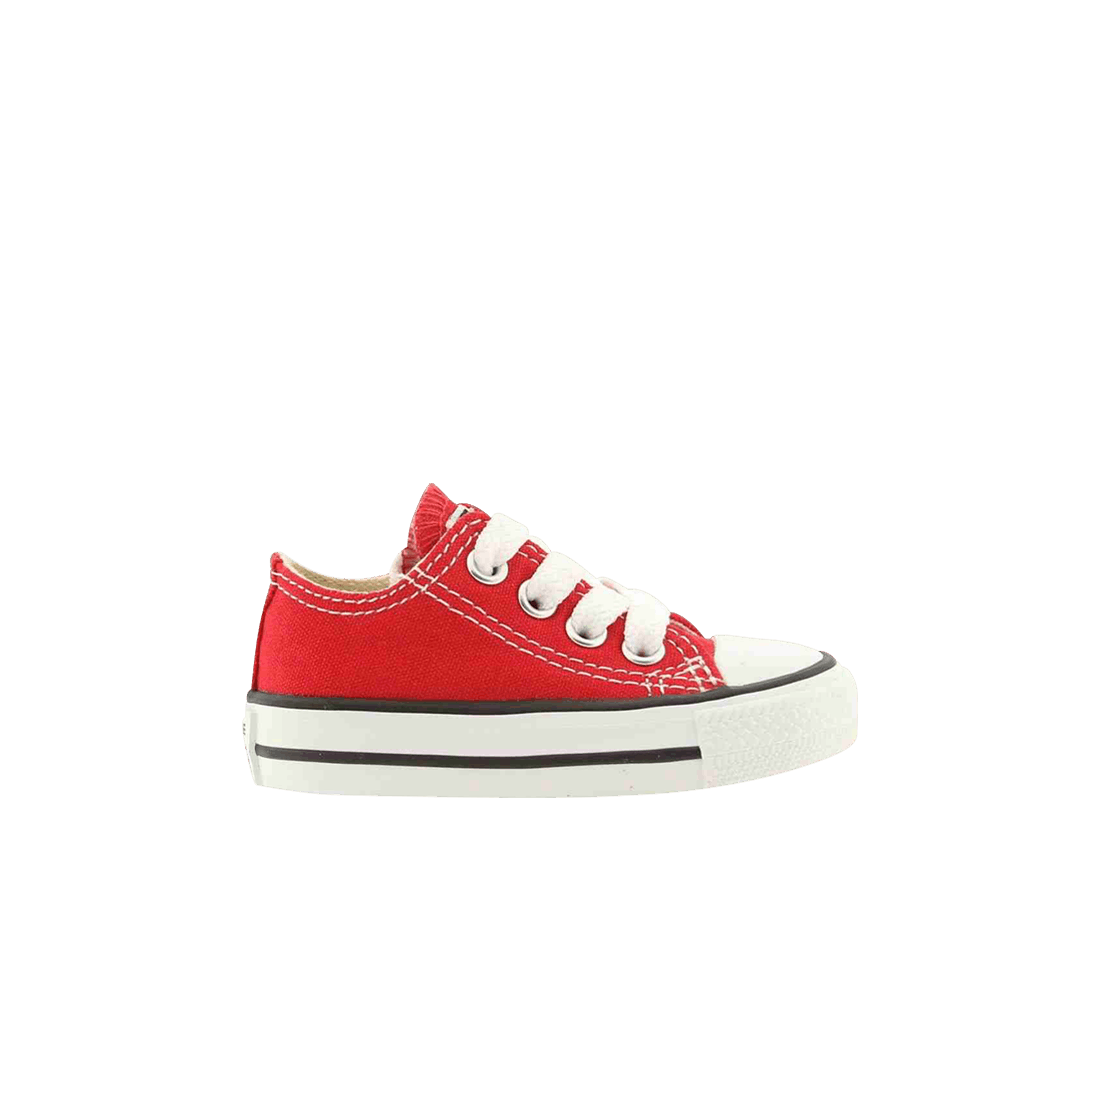 Chuck Taylor All Star Ox TD 'Red'